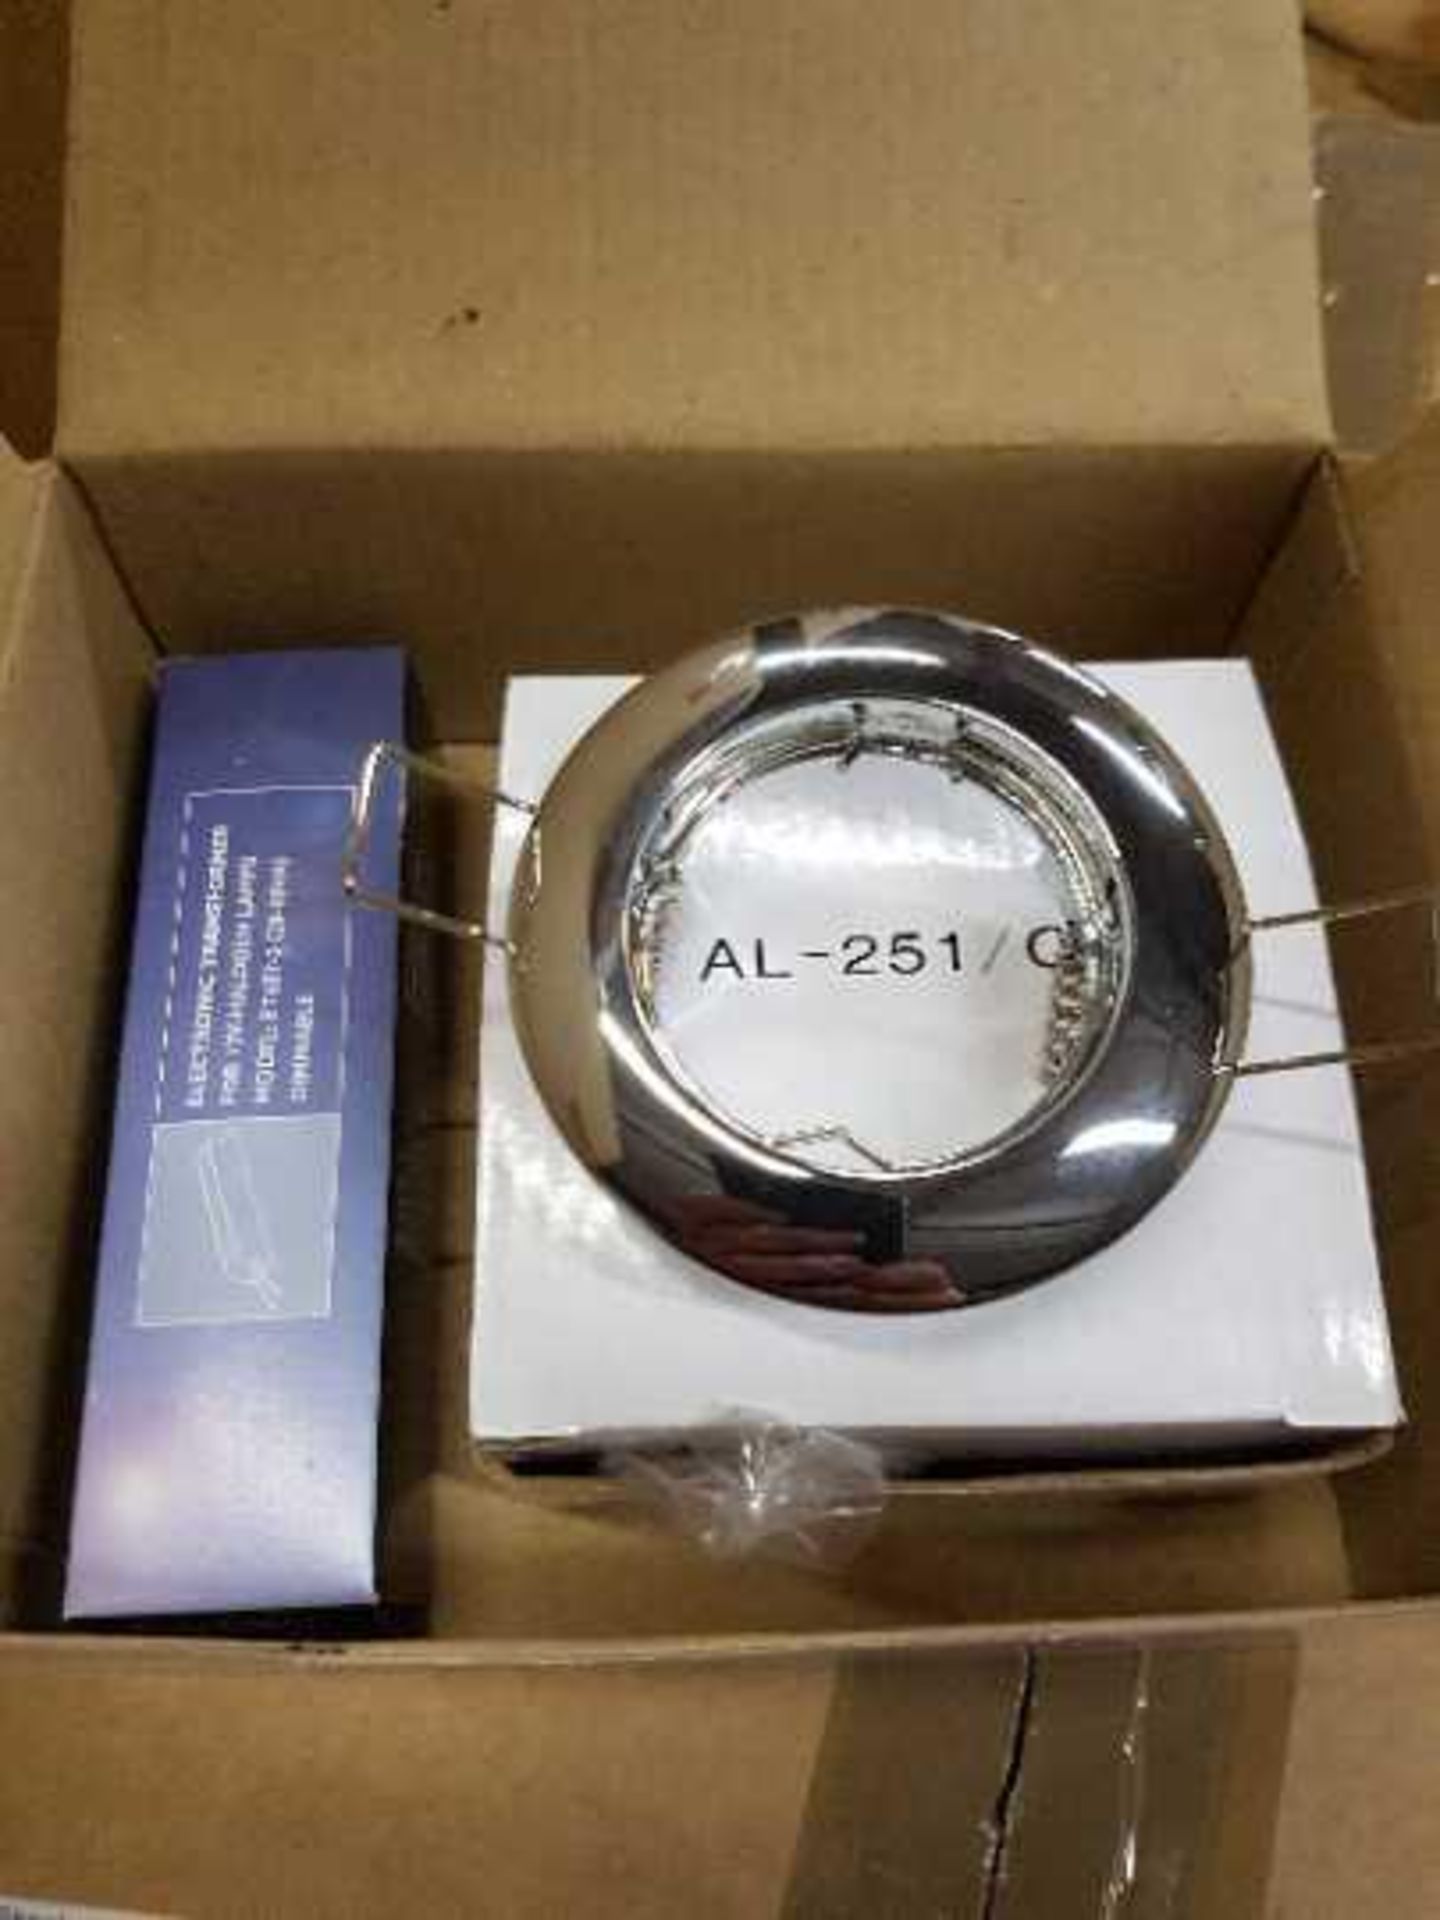 6x Chelsom Chrome Fixed Downlights with Transformer, RRP £33.56 Giving a Total Lot Price of £201.36,